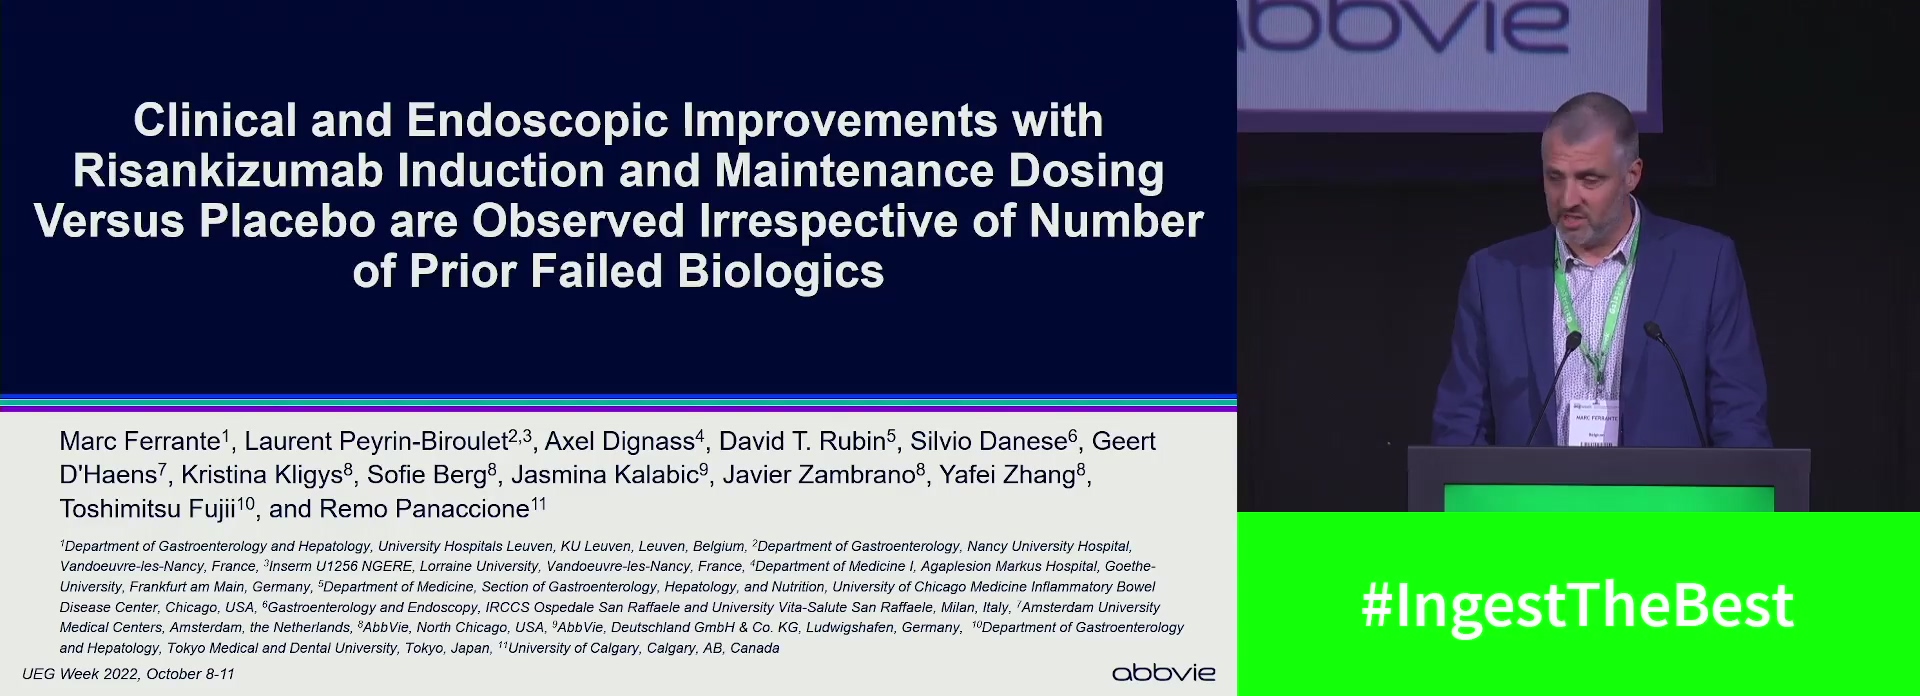 CLINICAL AND ENDOSCOPIC IMPROVEMENTS WITH RISANKIZUMAB INDUCTION AND MAINTENANCE DOSING VERSUS PLACEBO ARE OBSERVED IRRESPECTIVE OF NUMBER OF PRIOR FAILED BIOLOGICS